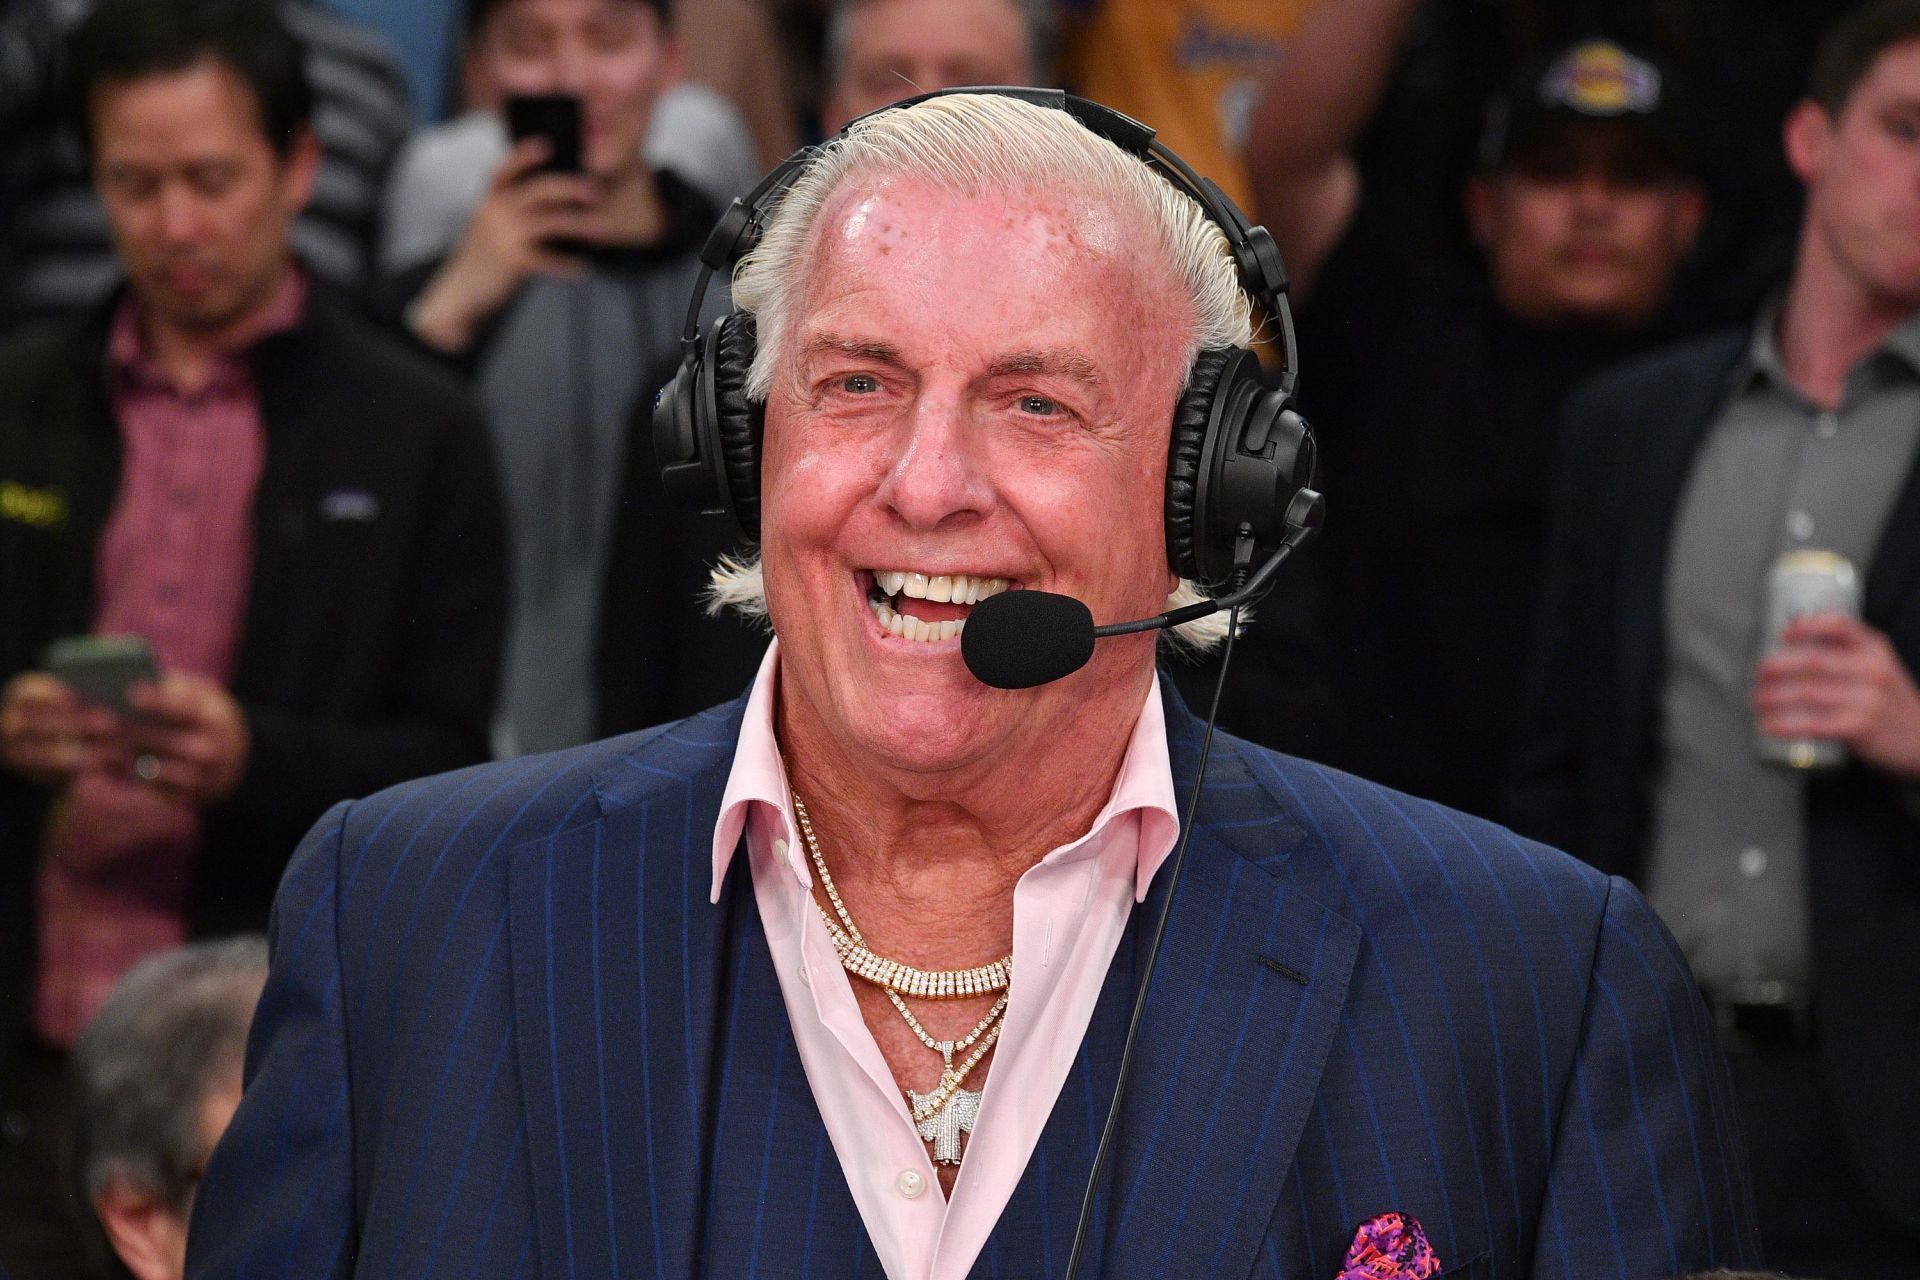 Ric Flair receives another Hall of Famer ring